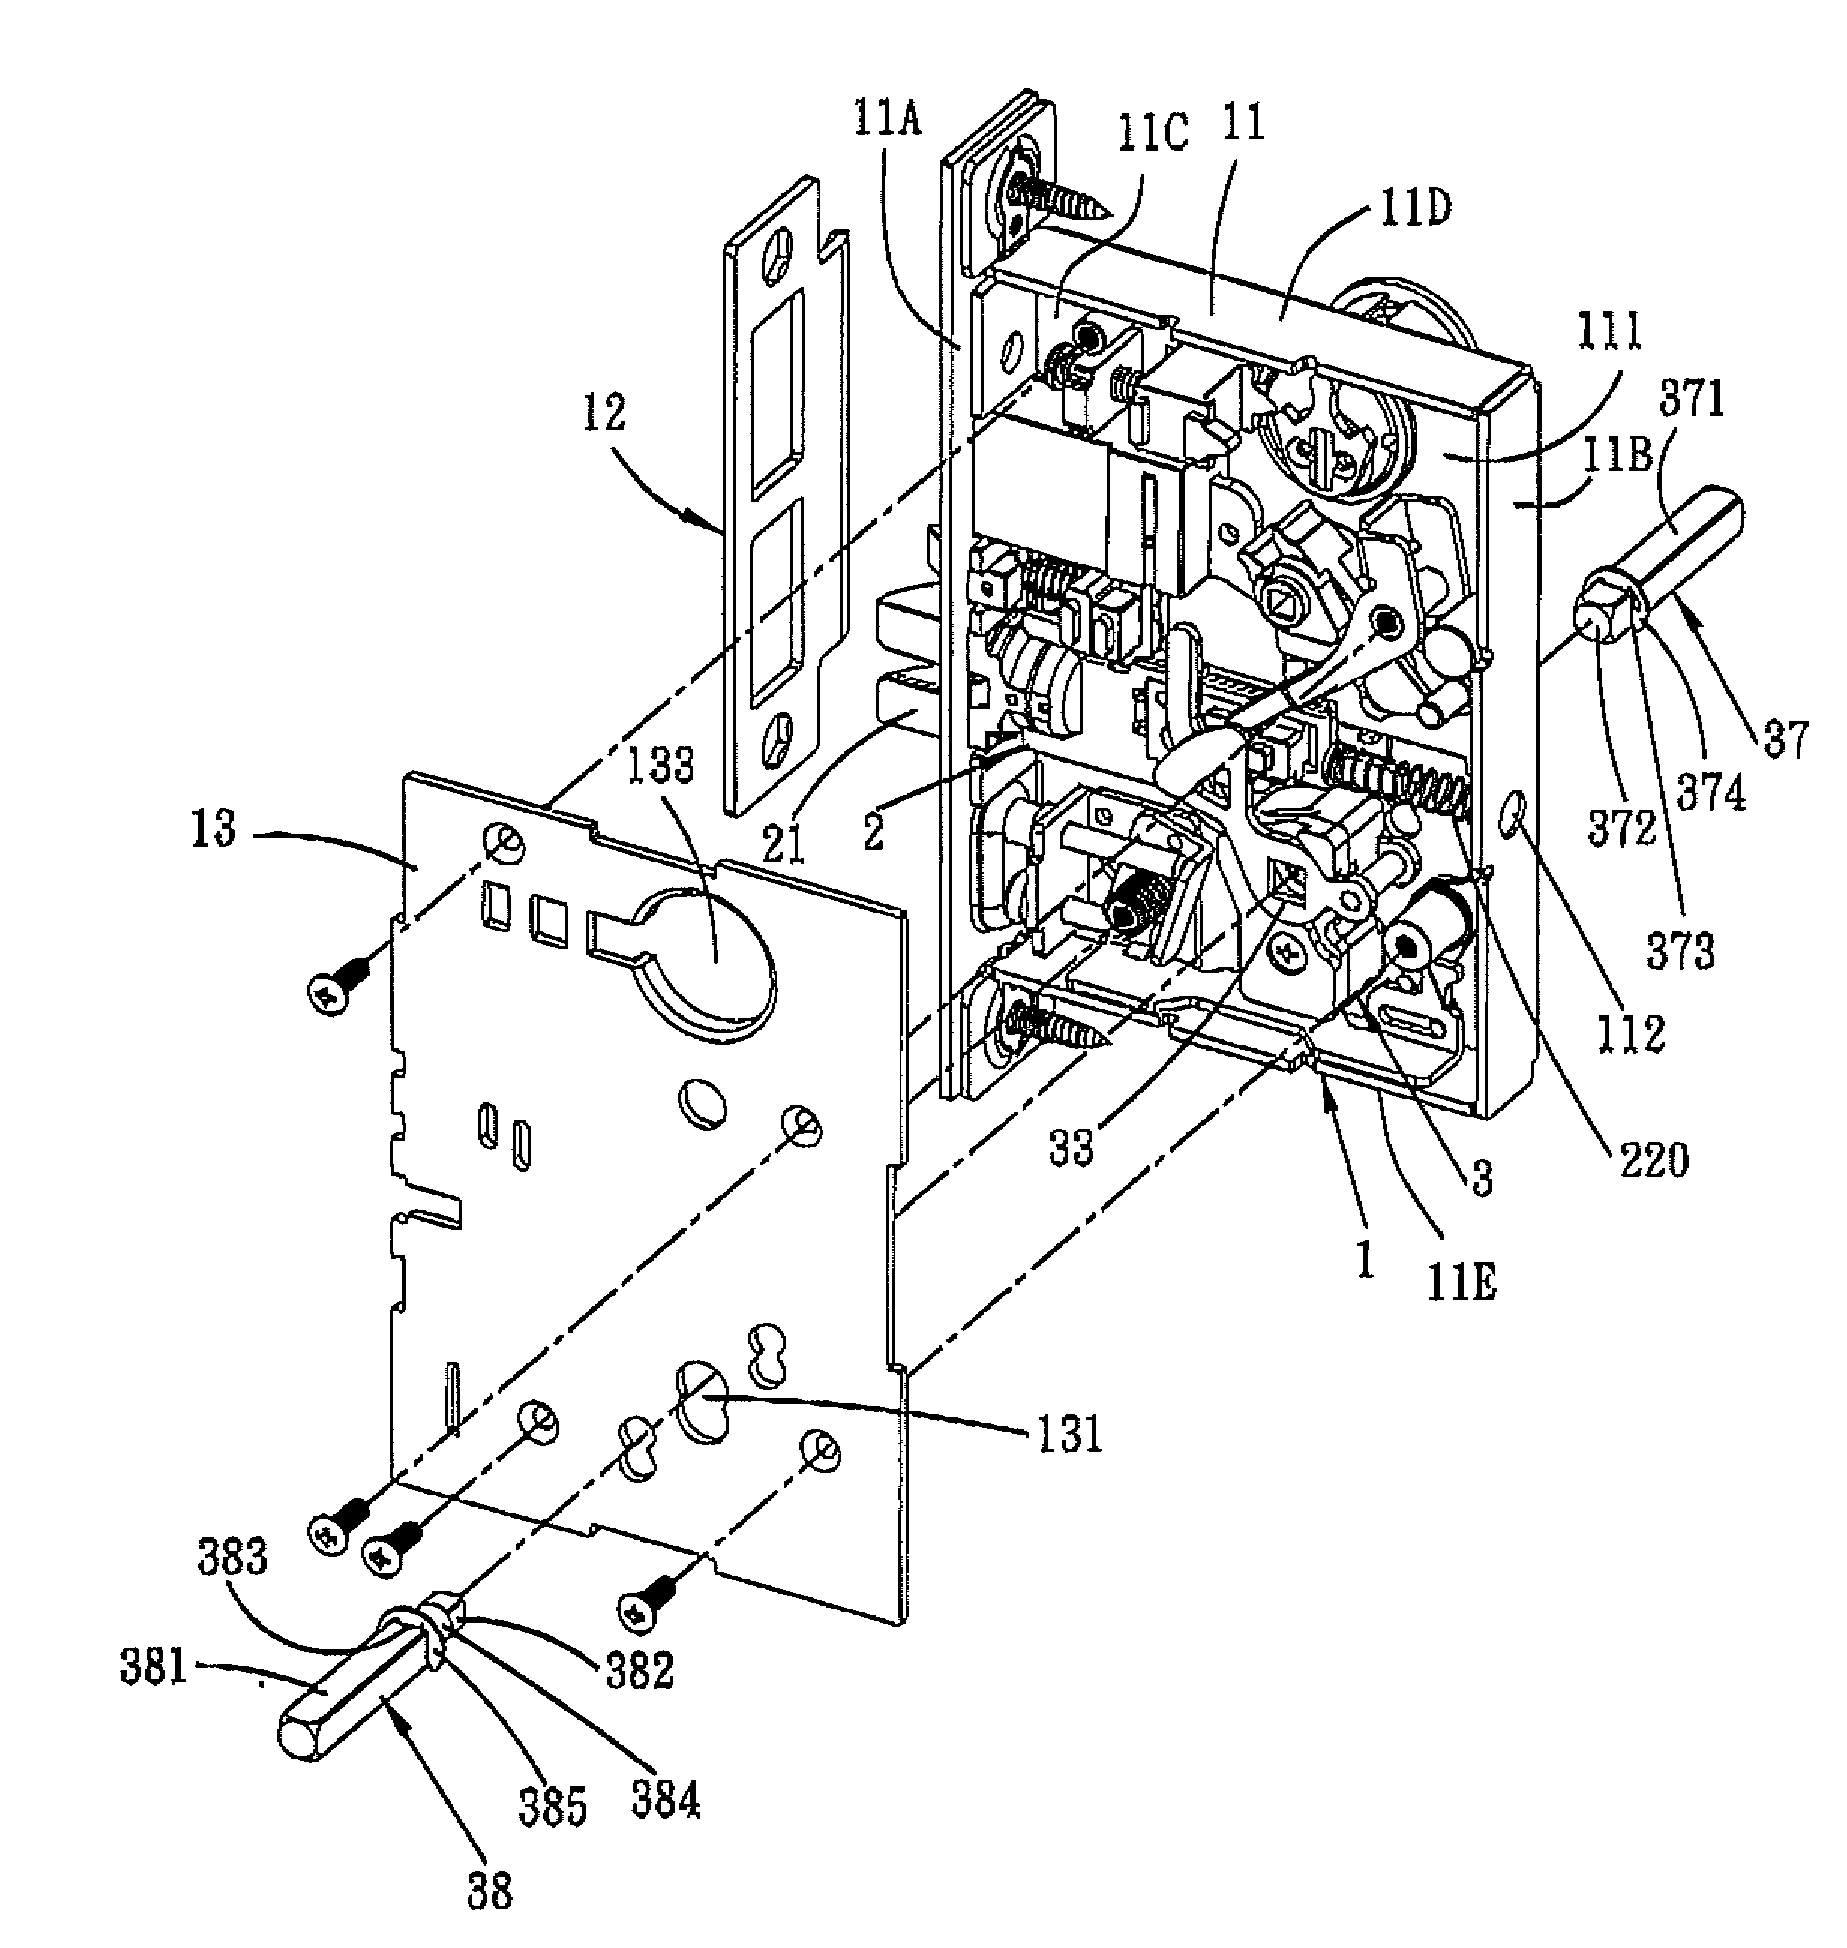 Latch-bolt mechanism operable to allow for idle rotation of an exterior handle